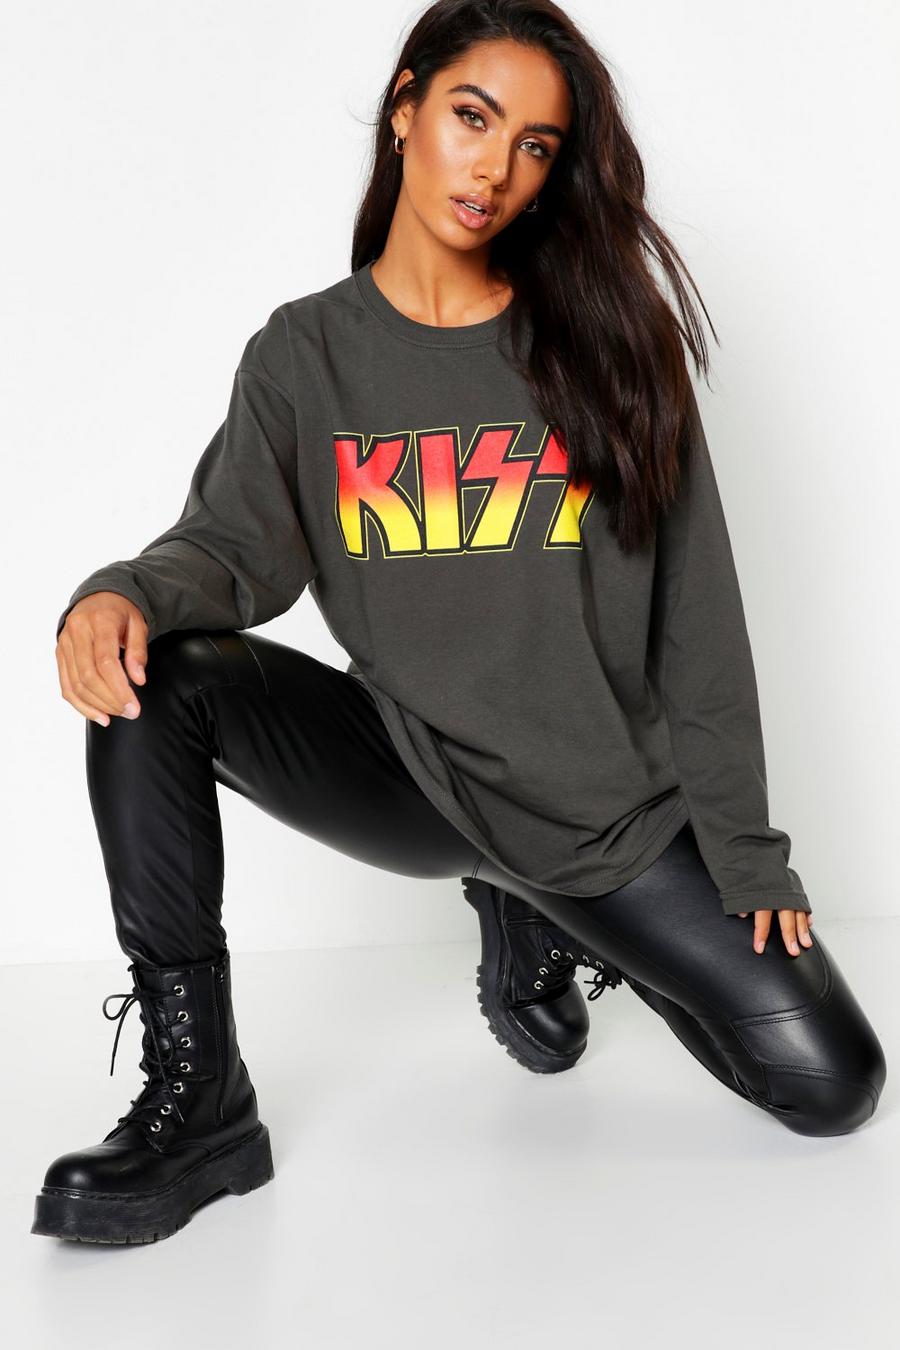 T-shirt oversize a maniche lunghe ufficiale dei Kiss image number 1